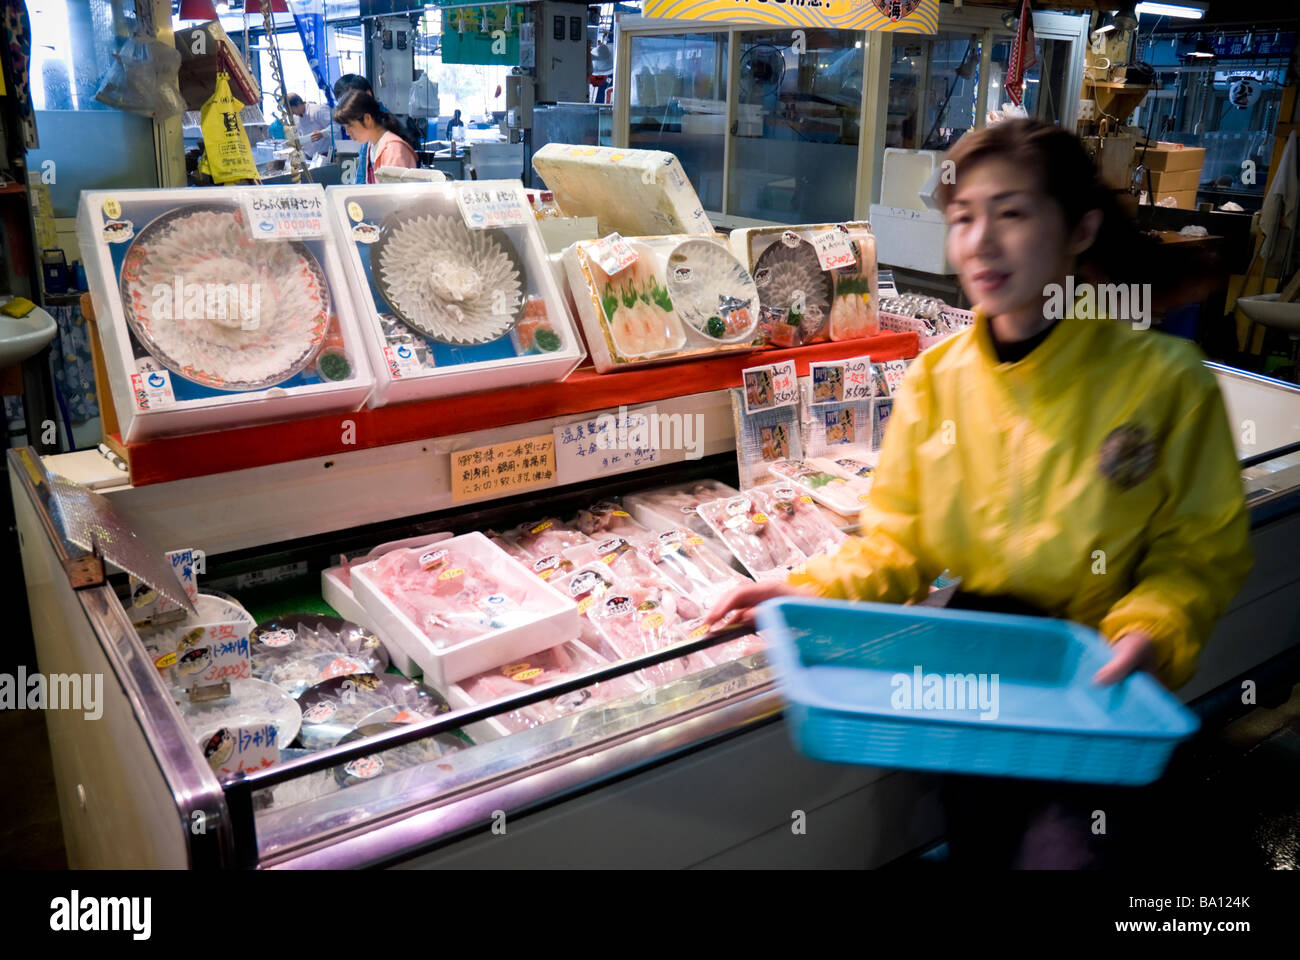 Lady selling fugu (puffer fish) at a market in Shimonoseki, Japan. Fugu is the fish that, if prepared incorrectly, can be poisonous. Stock Photo